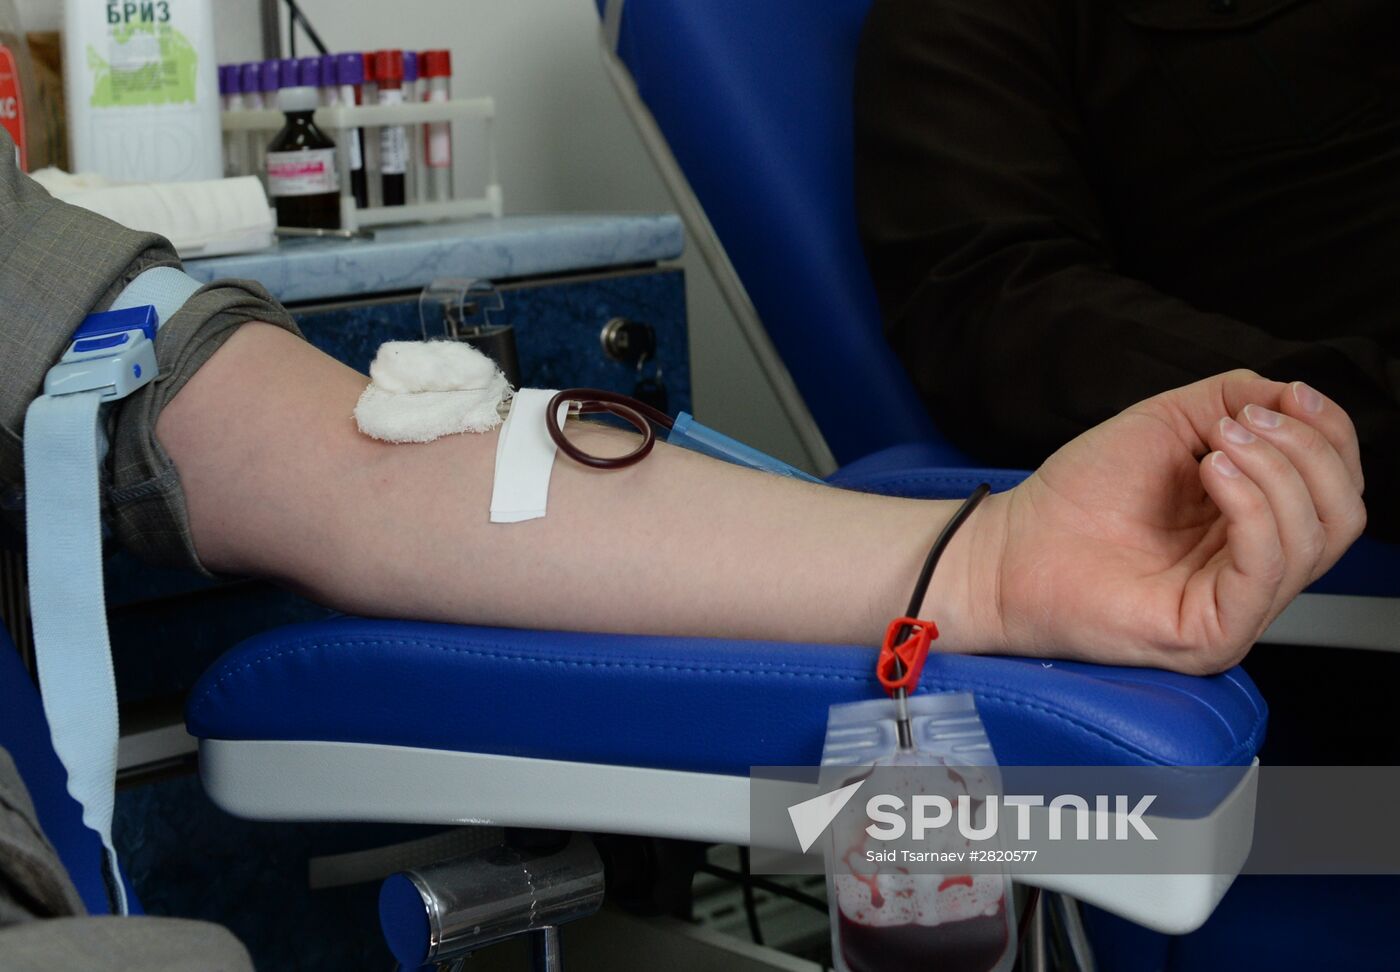 From Heart to Heart blood donor campaign in Grozny